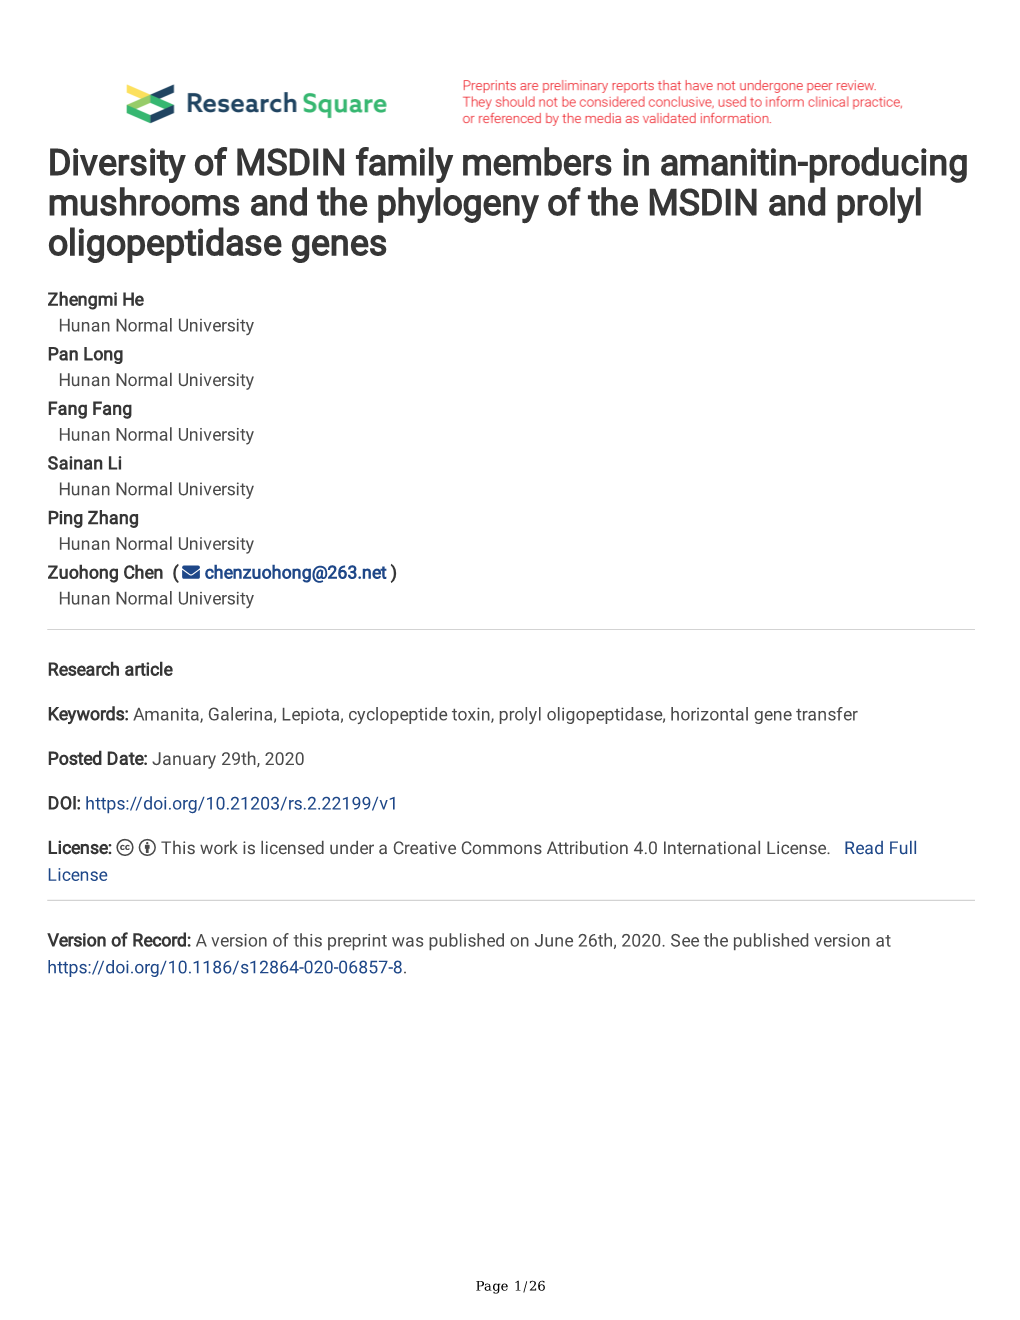 Diversity of MSDIN Family Members in Amanitin- Producing Mushrooms and the Phylogeny of the MSDIN and Prolyl Oligopeptidase Gene